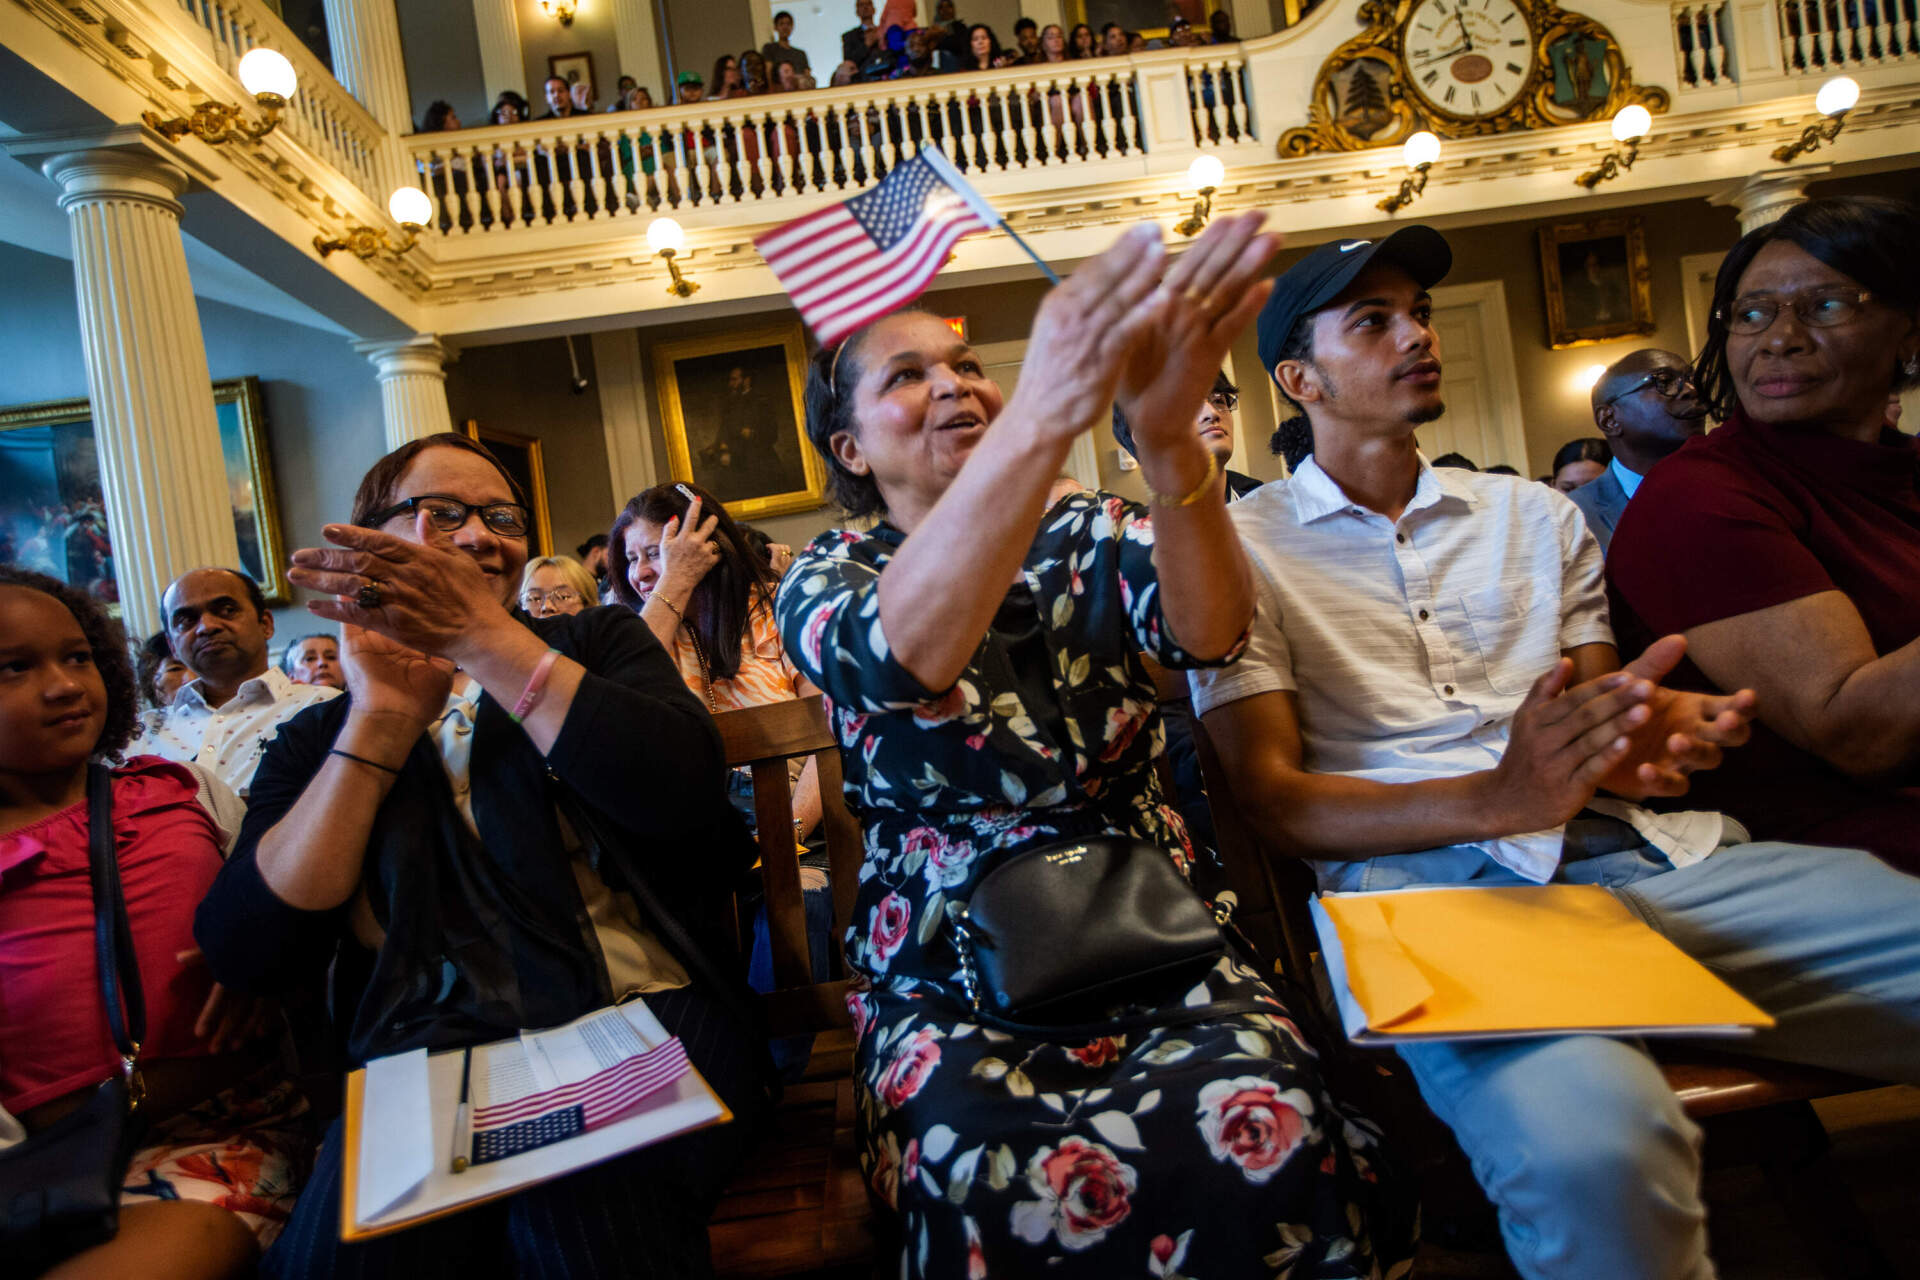 Alina Gomes, originally from Cape Verde, claps while holding an American flag during a naturalization ceremony at Faneuil Hall. (Jesse Costa/WBUR)